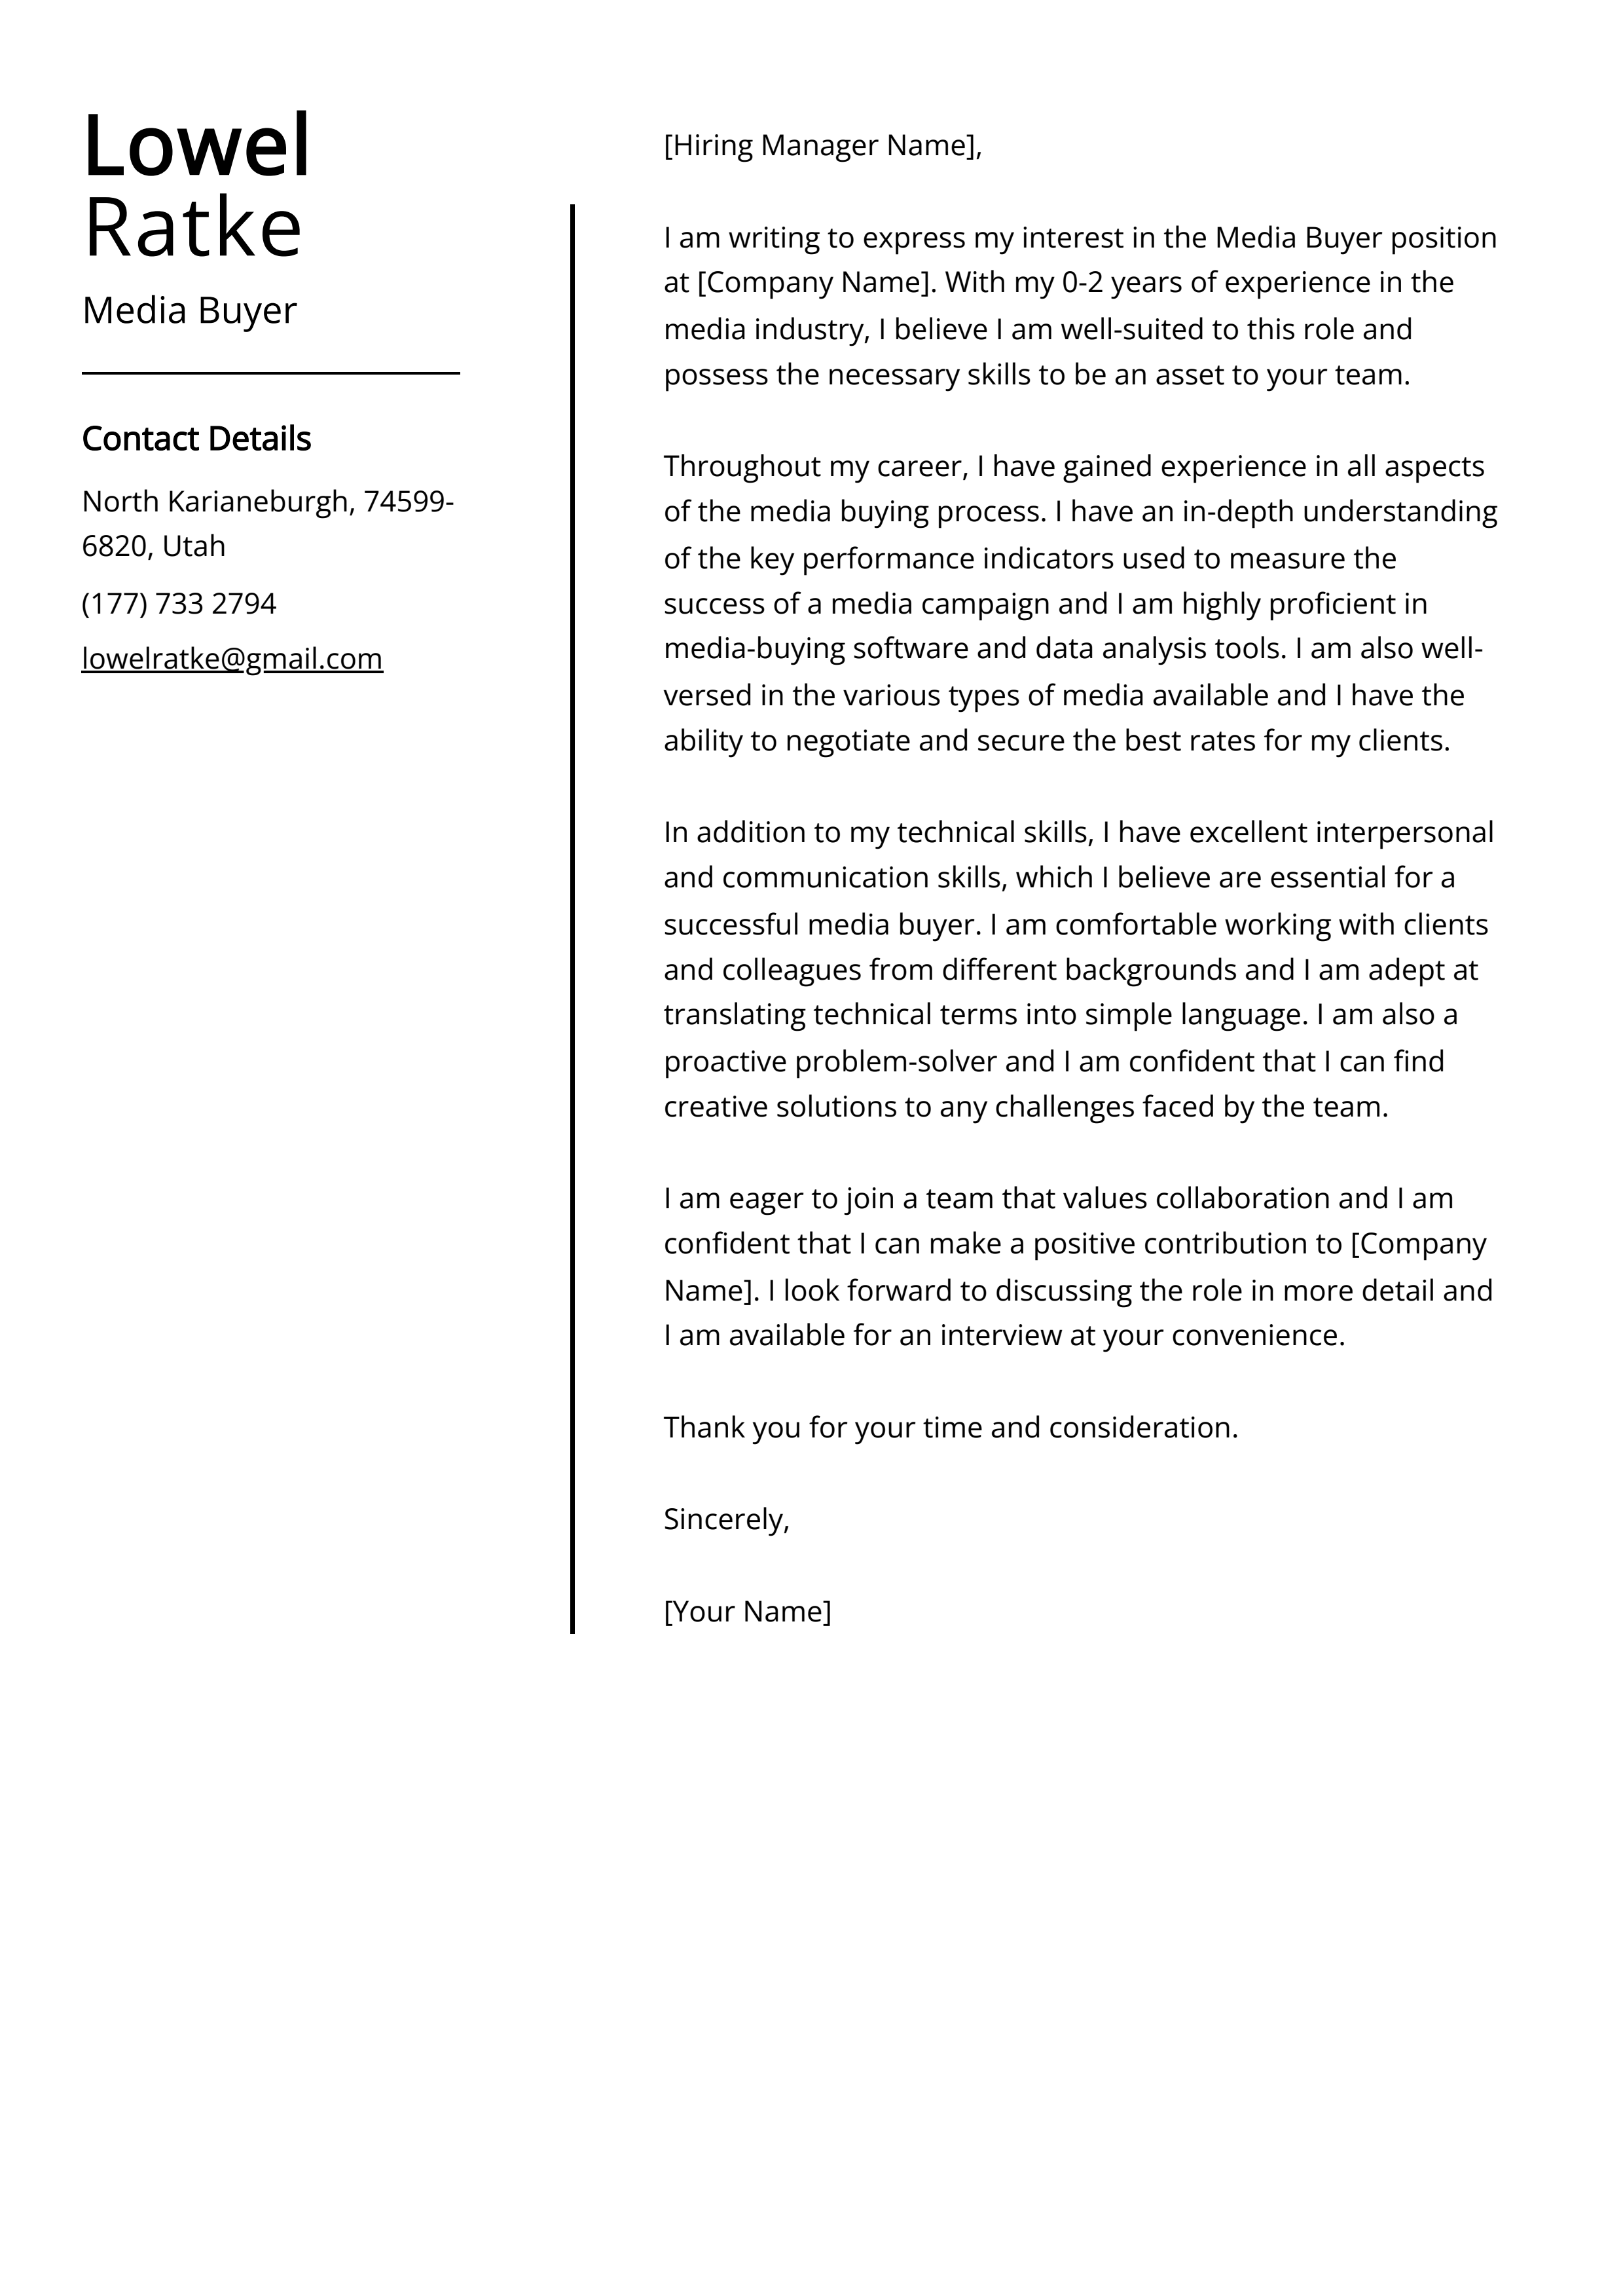 Media Buyer Cover Letter Example